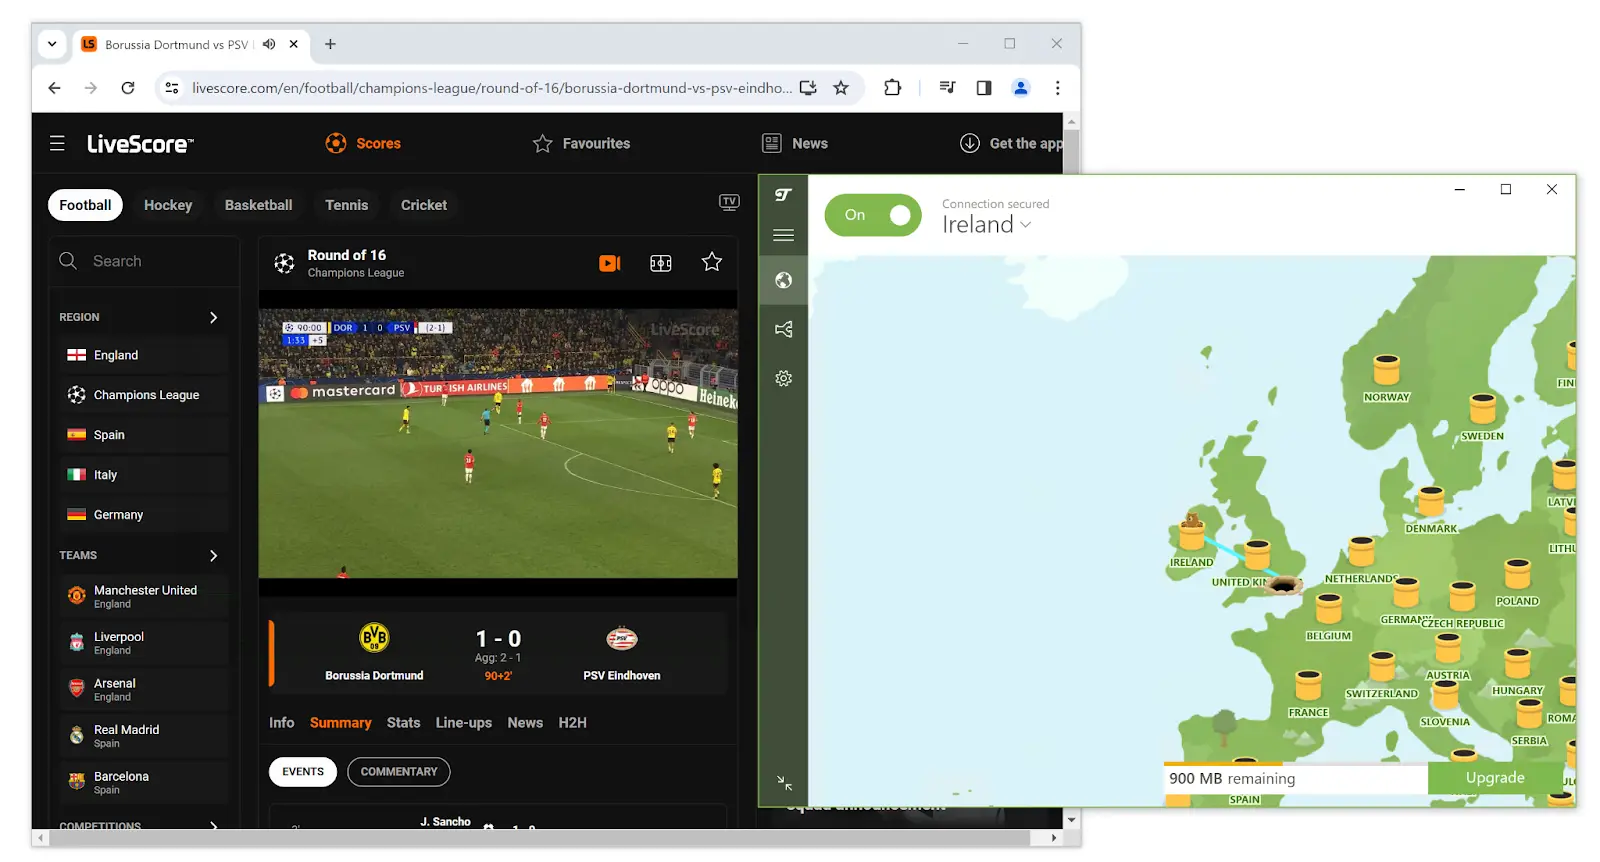 Using TunnelBear Free to unblock LiveScore and watch the UCL 